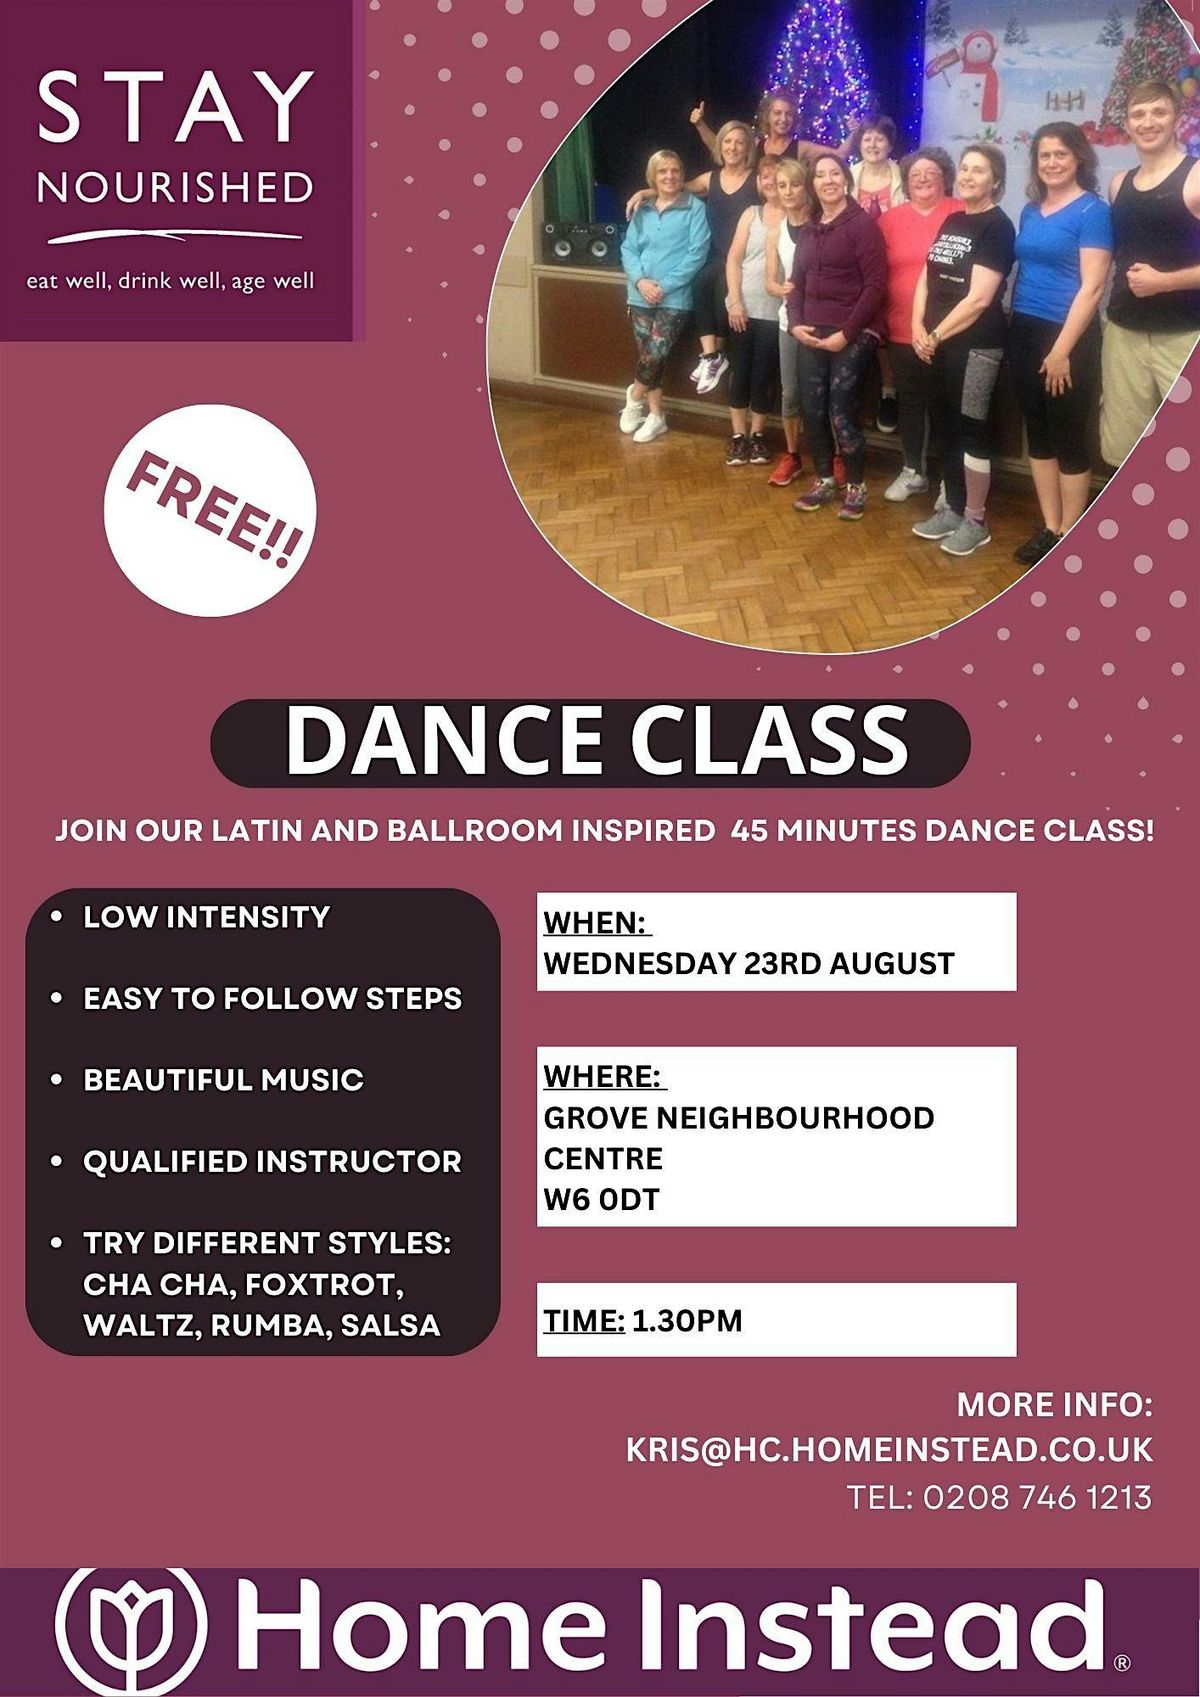 Gentle Latin and Ballroom Inspired Dance Class in Hammersmith!